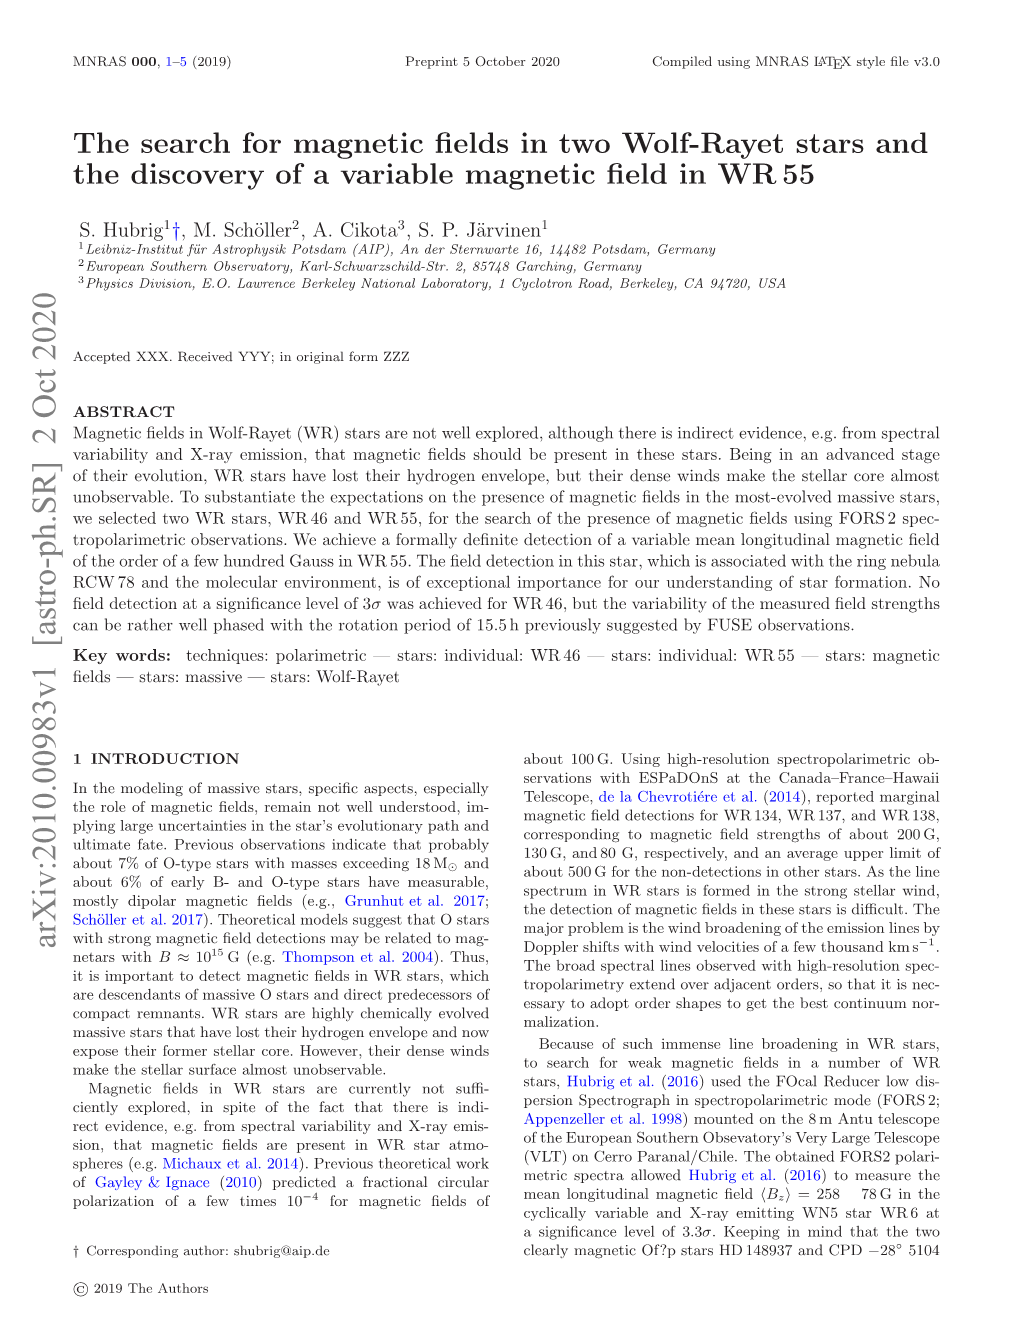 The Search for Magnetic Fields in Two Wolf-Rayet Stars and the Discovery